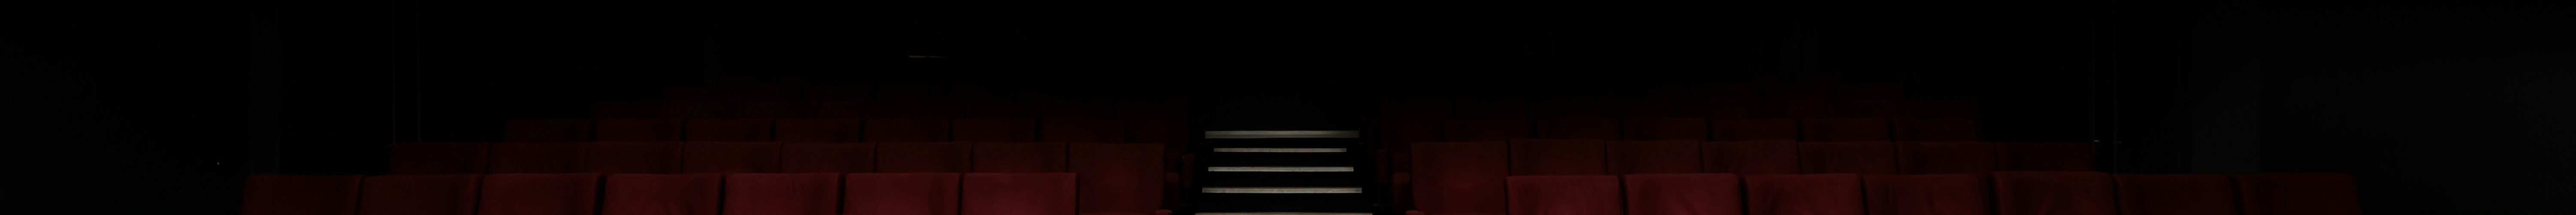 red cinema seats extending into the darkness